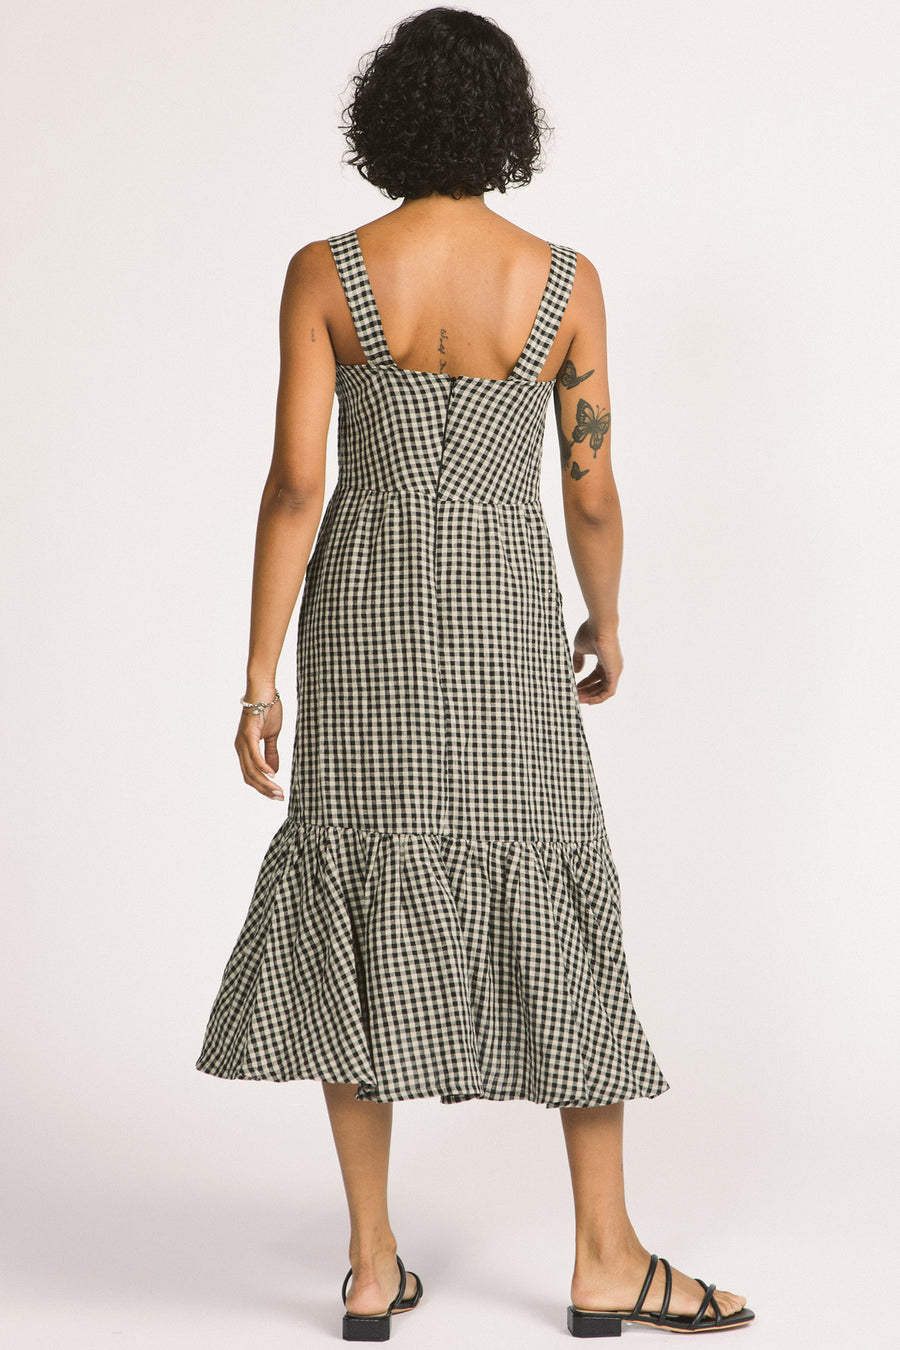 Back view of woman wearing black and white linen gingham tiered Calista summer dress by Allison Wonderland. 